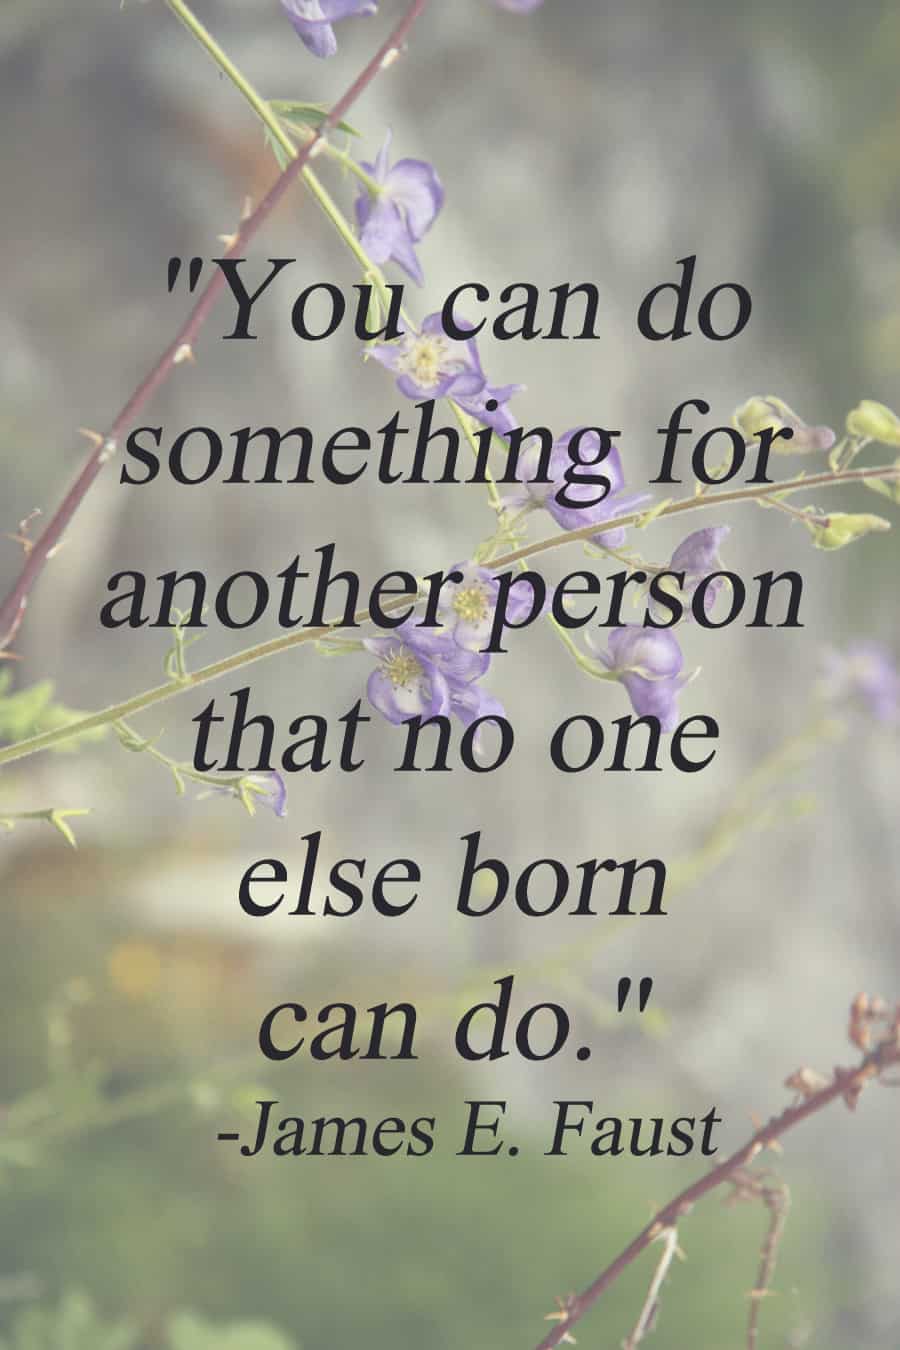 "You can do something for another person that no one else born can do." - James E. Faust"The things you are passionate about are not random, they are your calling." - Fabienne Fredrickson | via Autumn All Along